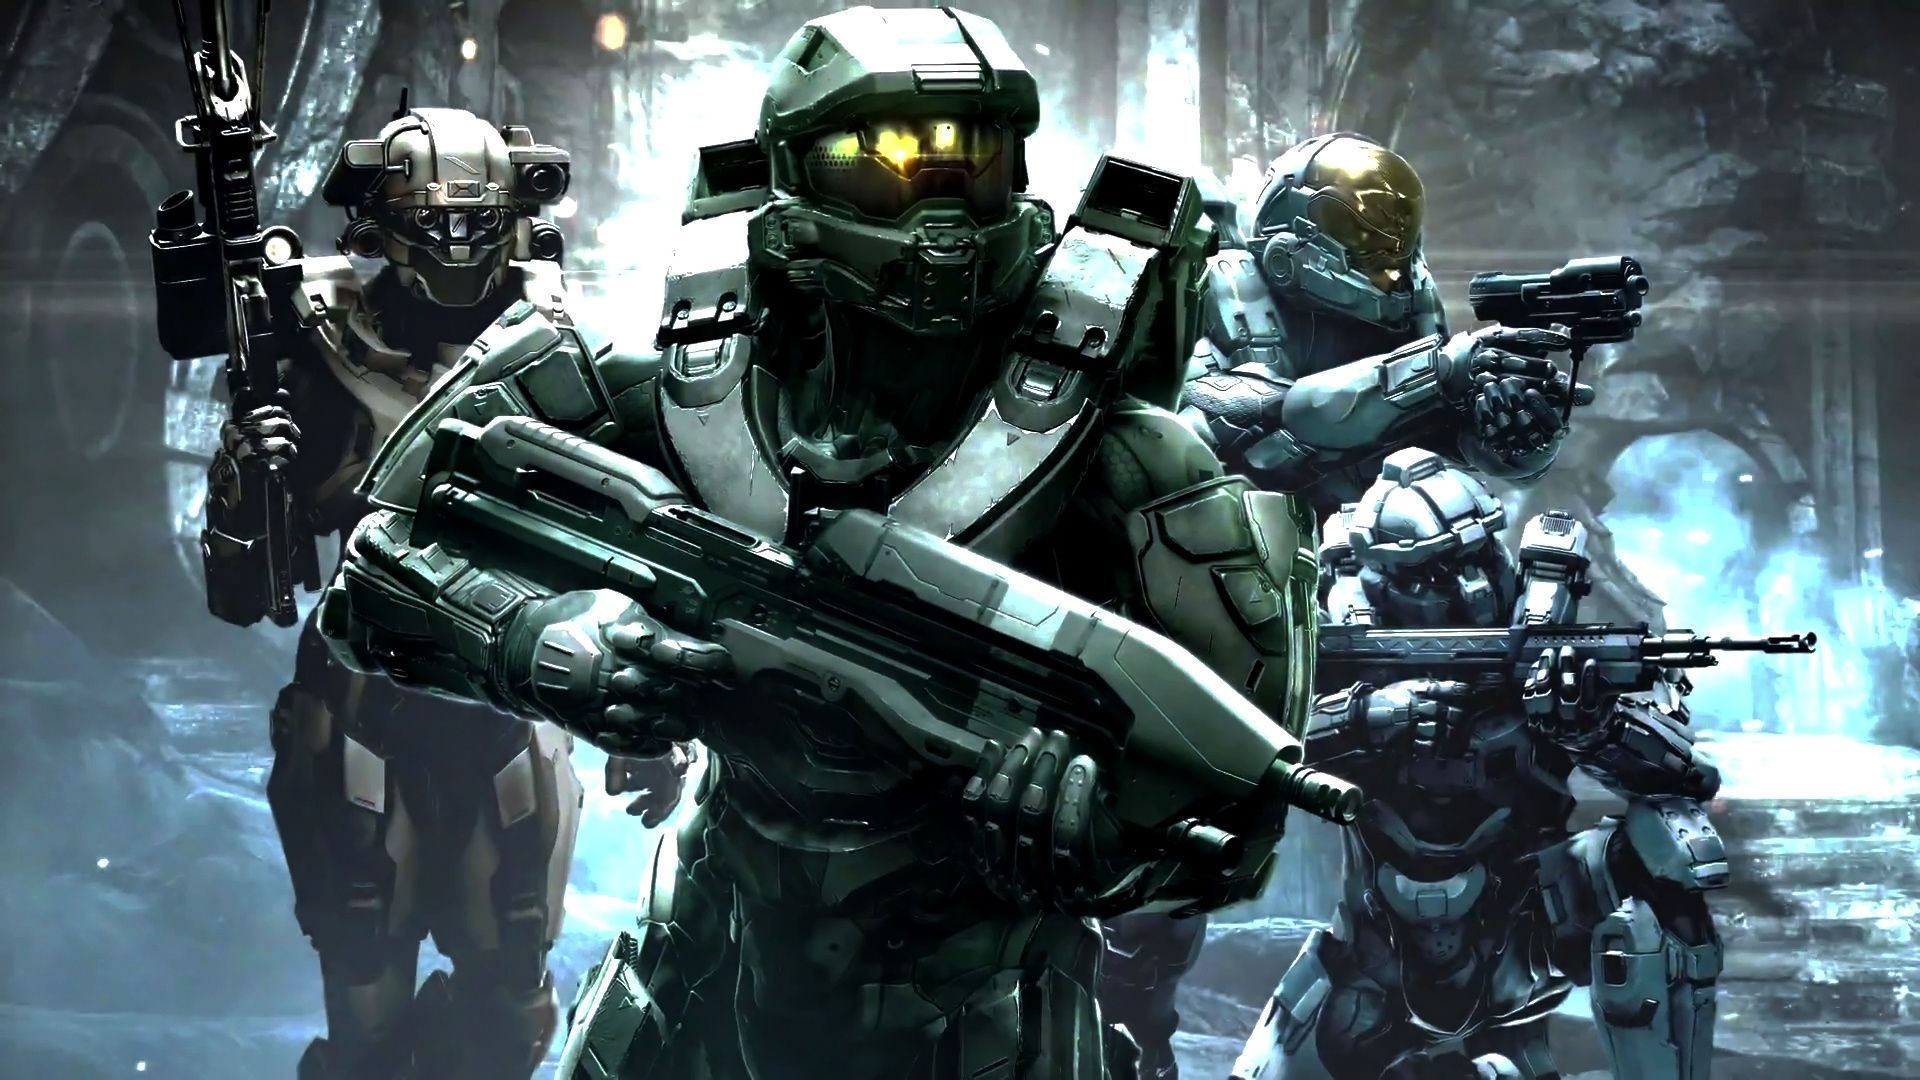 Halo 3 Iphone 5 Wallpaper - Free Wallpaper Page